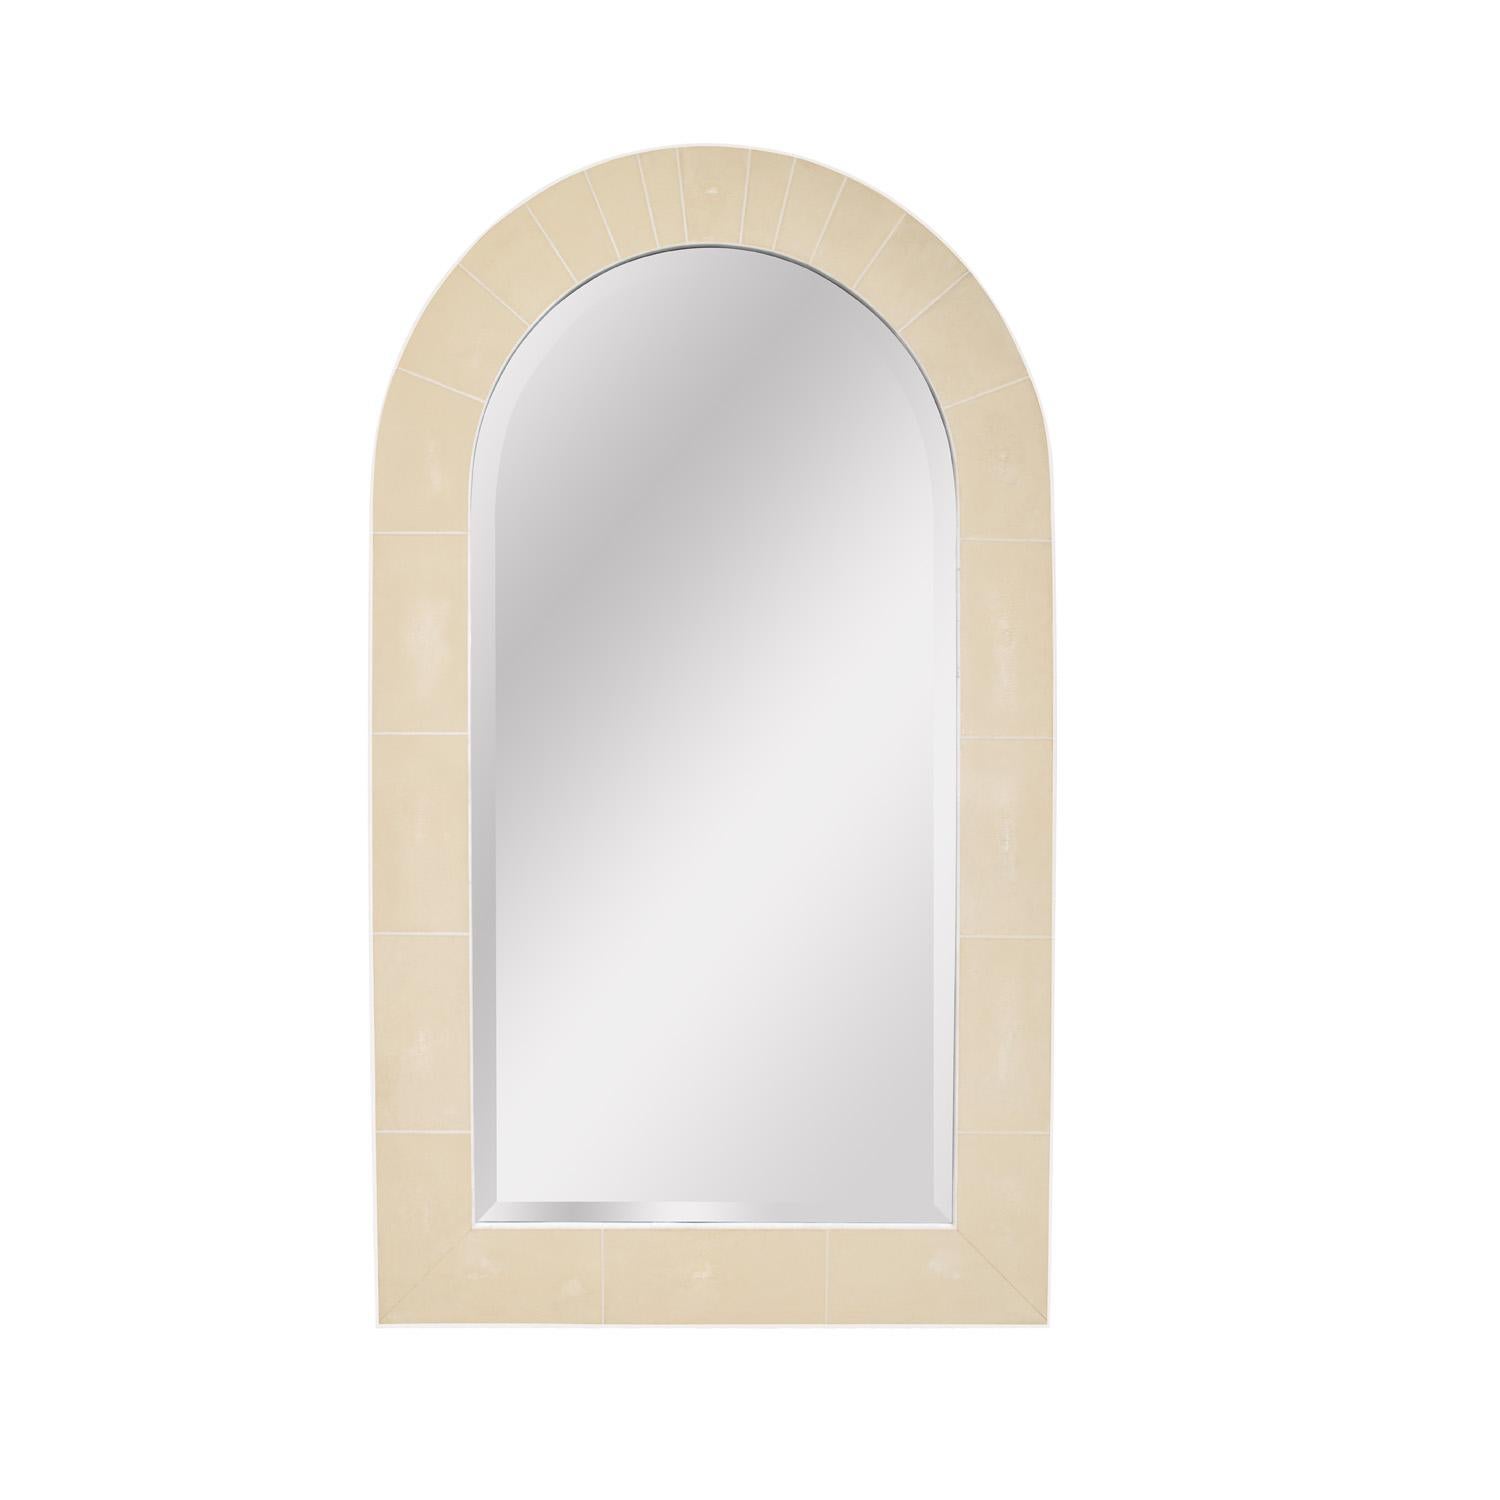 Exceptional and iconic “Dome Top Mirror” in ivory shagreen with bone inlays and outside edge in tessellated travertine with beveled mirror by Karl Springer,  American 1980's. The materials and craftsmanship of this mirror are absolutely superb.  The